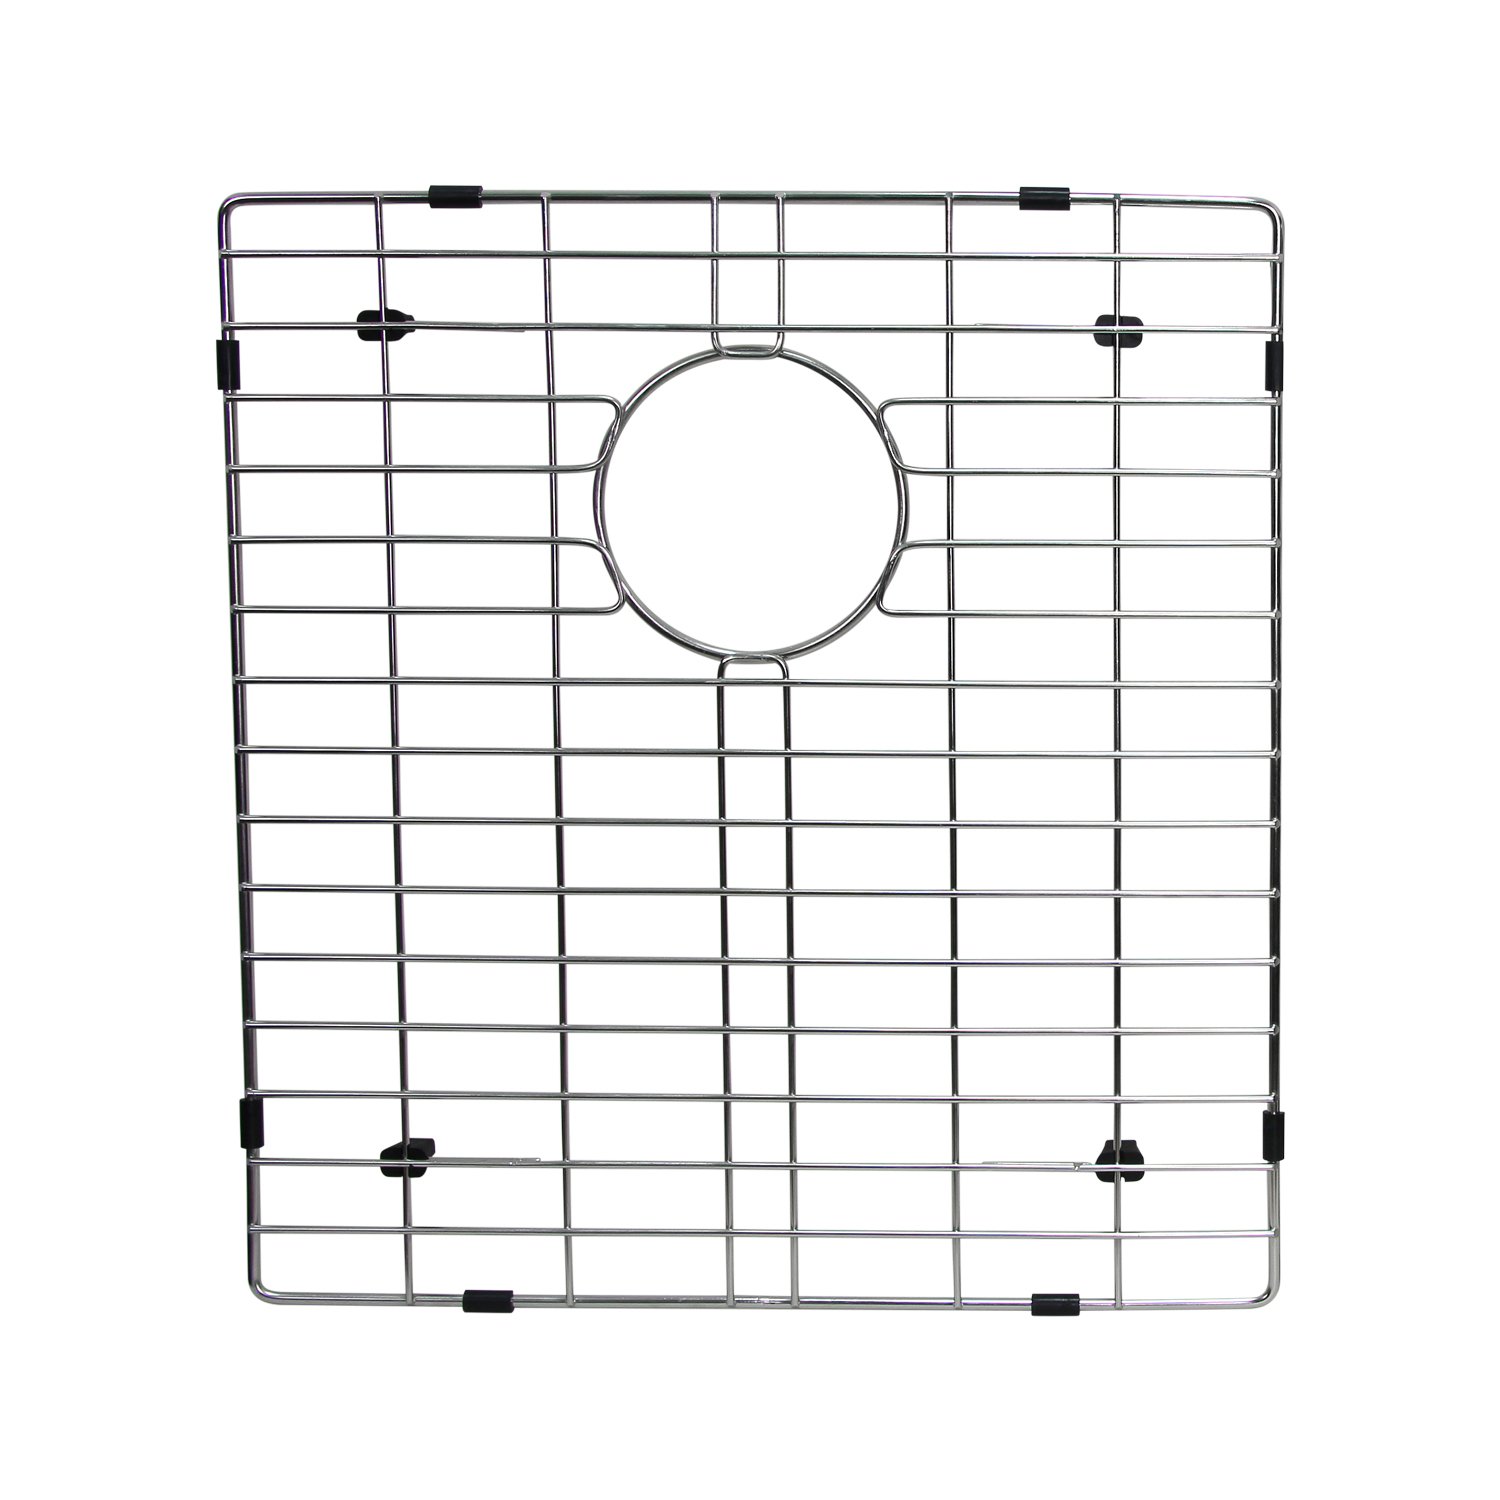 BOANN Stainless Steel Grid for 60/40 UMR3219D2 Sink - Big Bowl (BNG4042B)